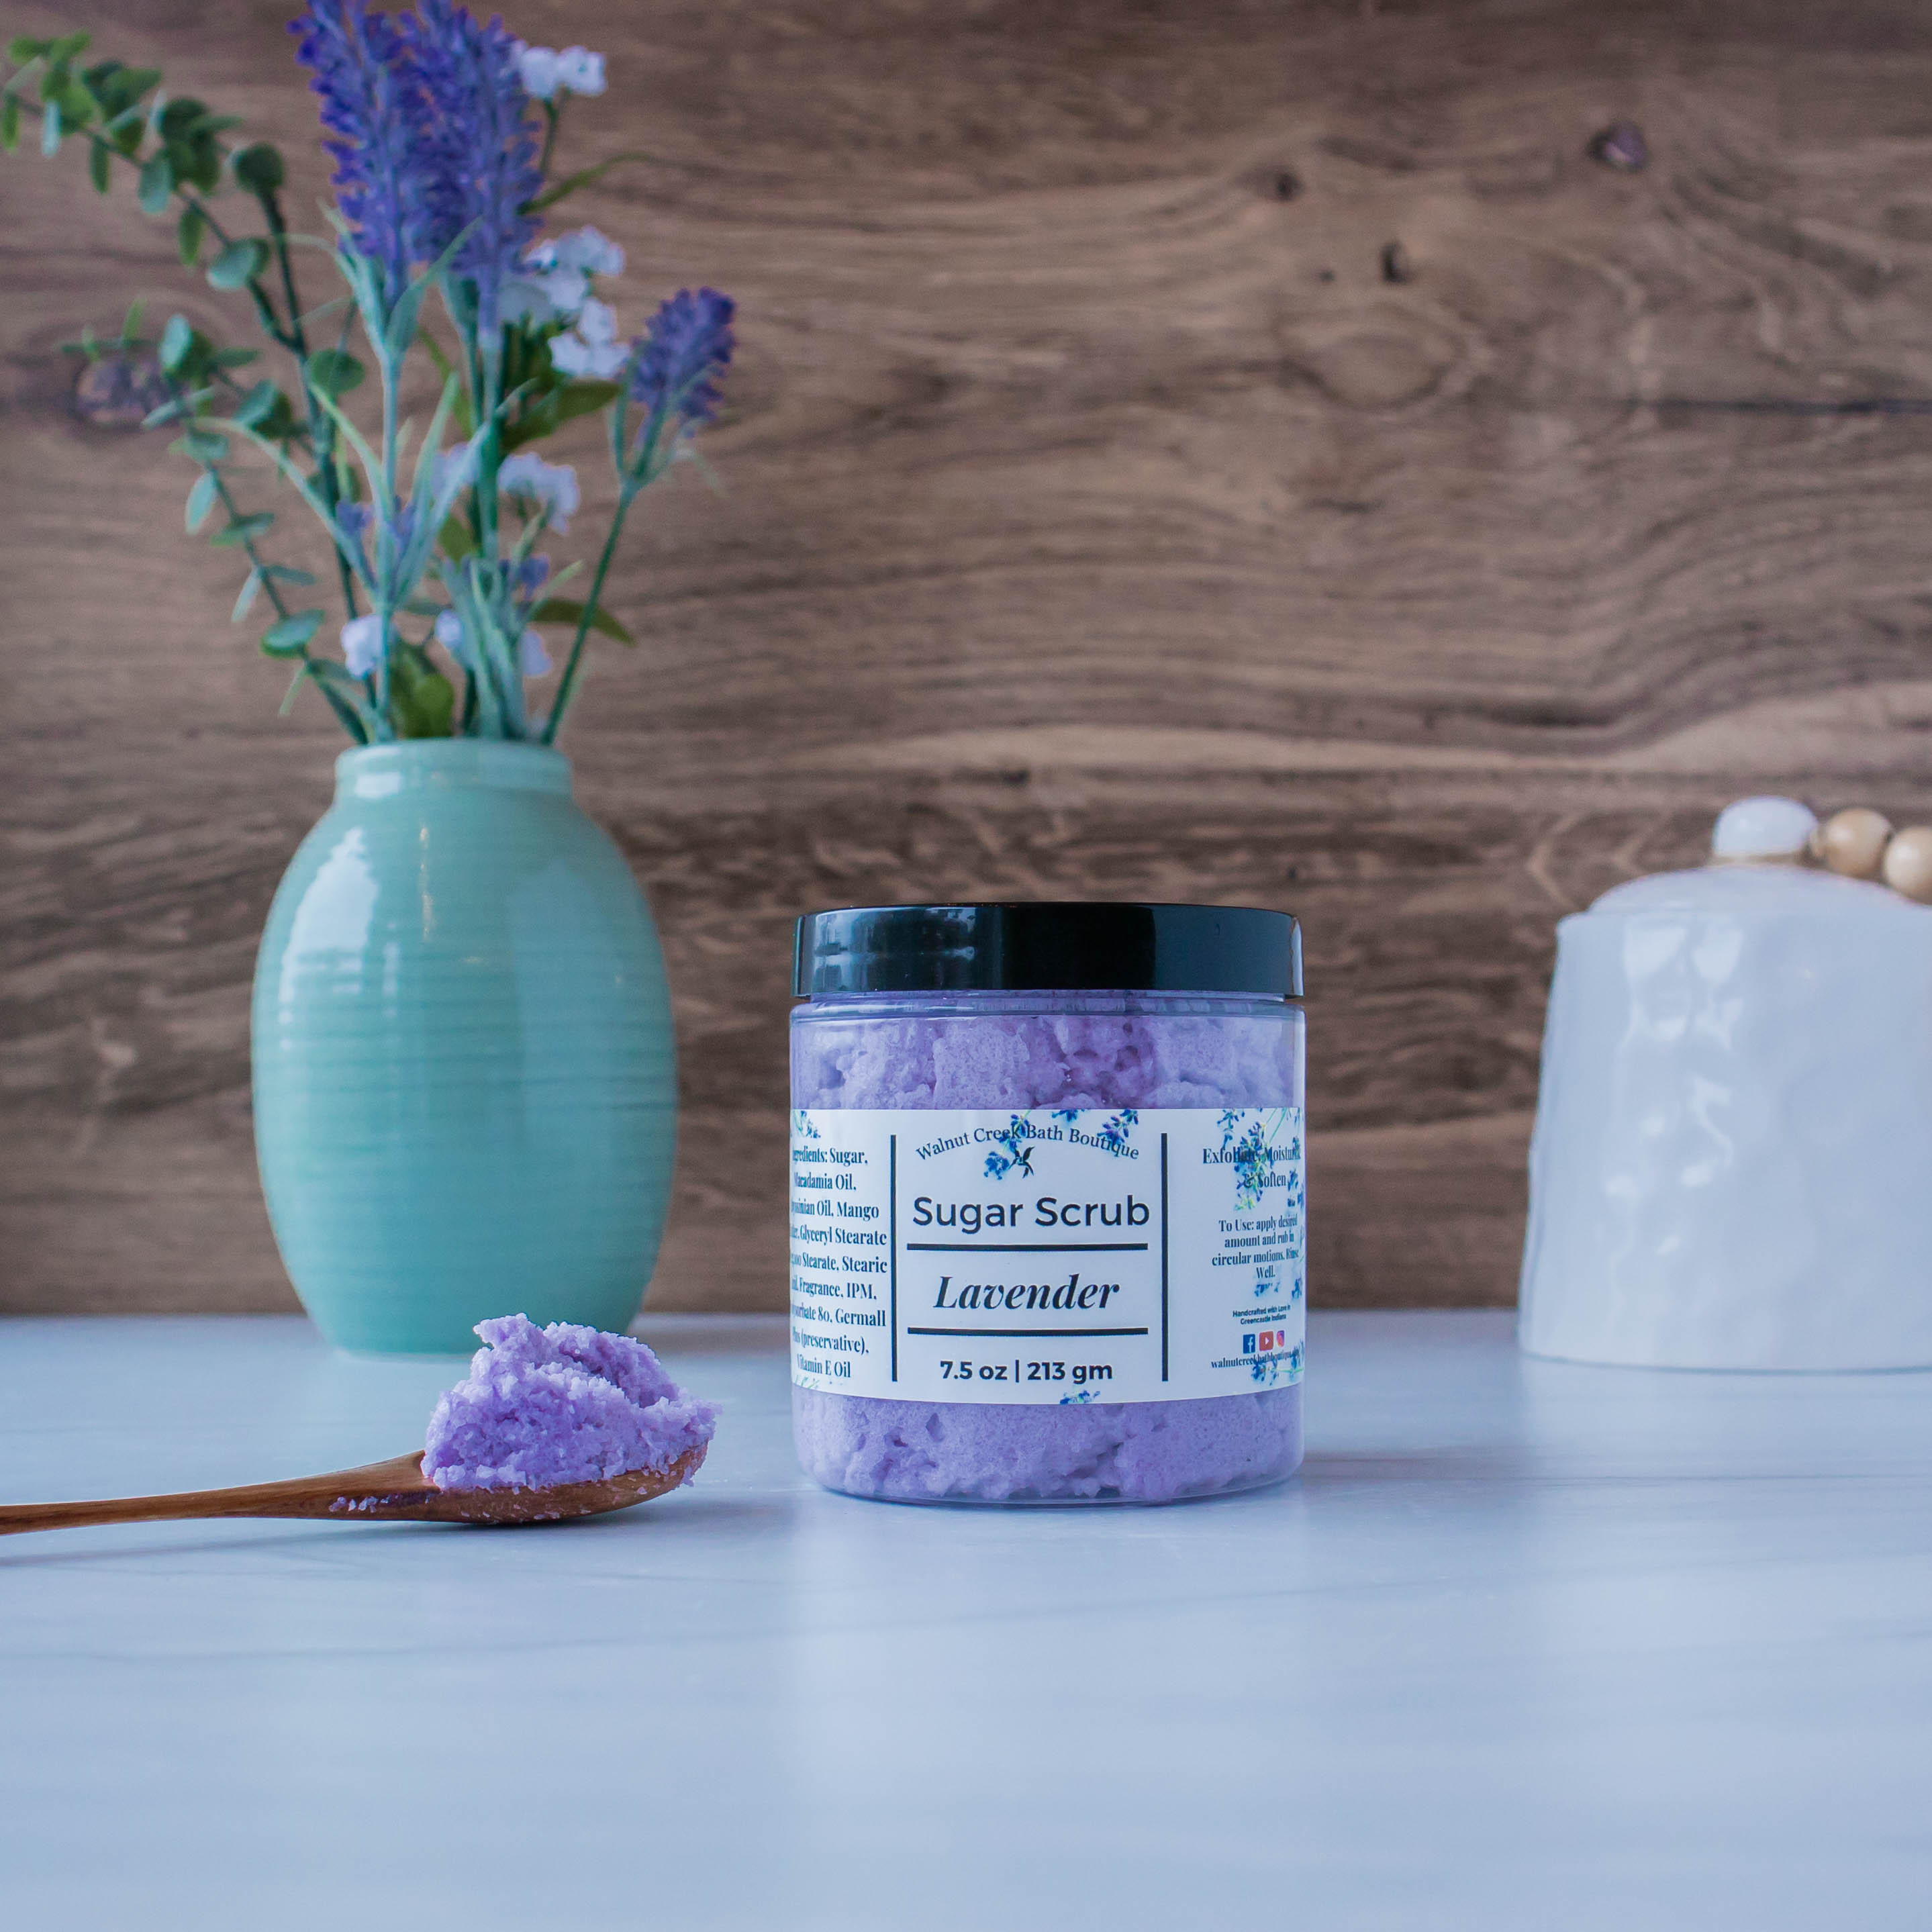 Lavender scrub is sitting center. there is a small wooden spoon holding some of the scrub to show texture. to the left is a blue vase with some greenery and to the right back is a wooden pumpkin. this is all sitting on a white board and there is a brown wood backdrop.